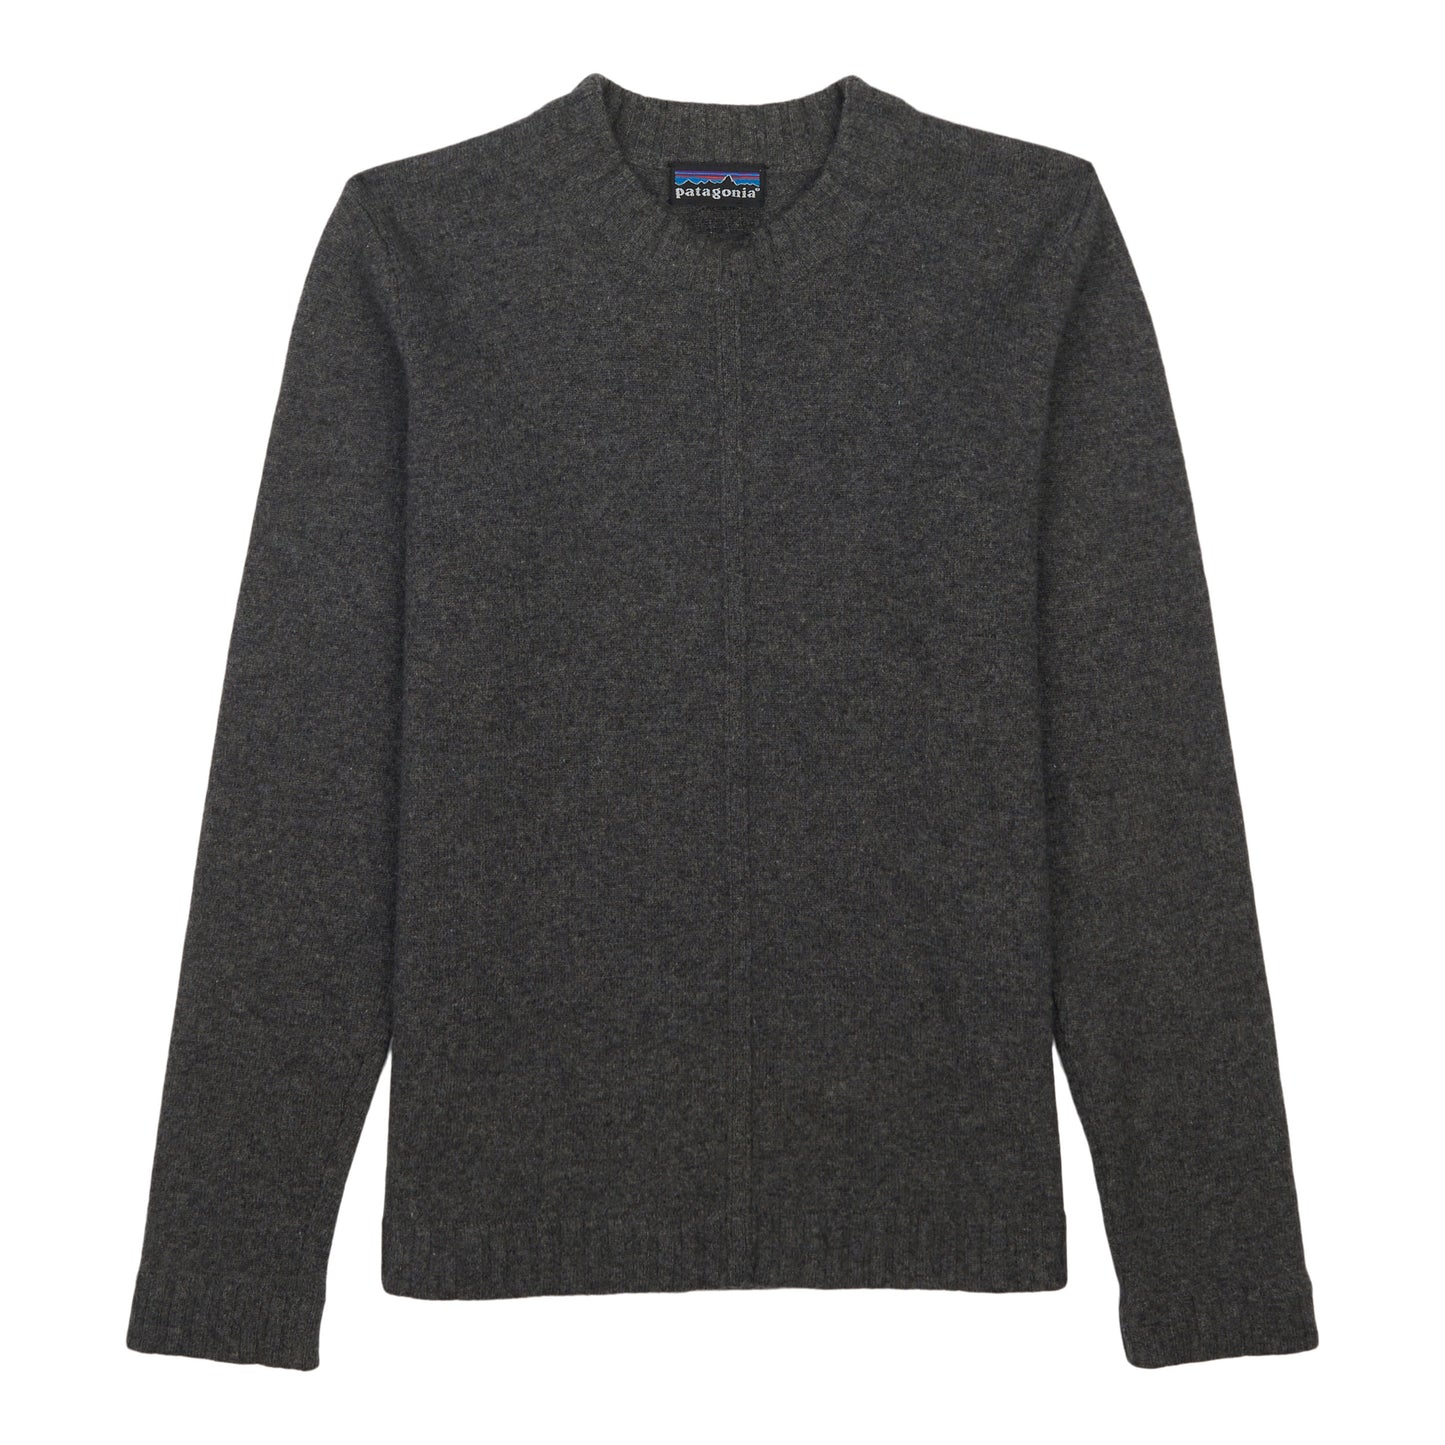 M's Recycled Wool Waffle Knit Sweater